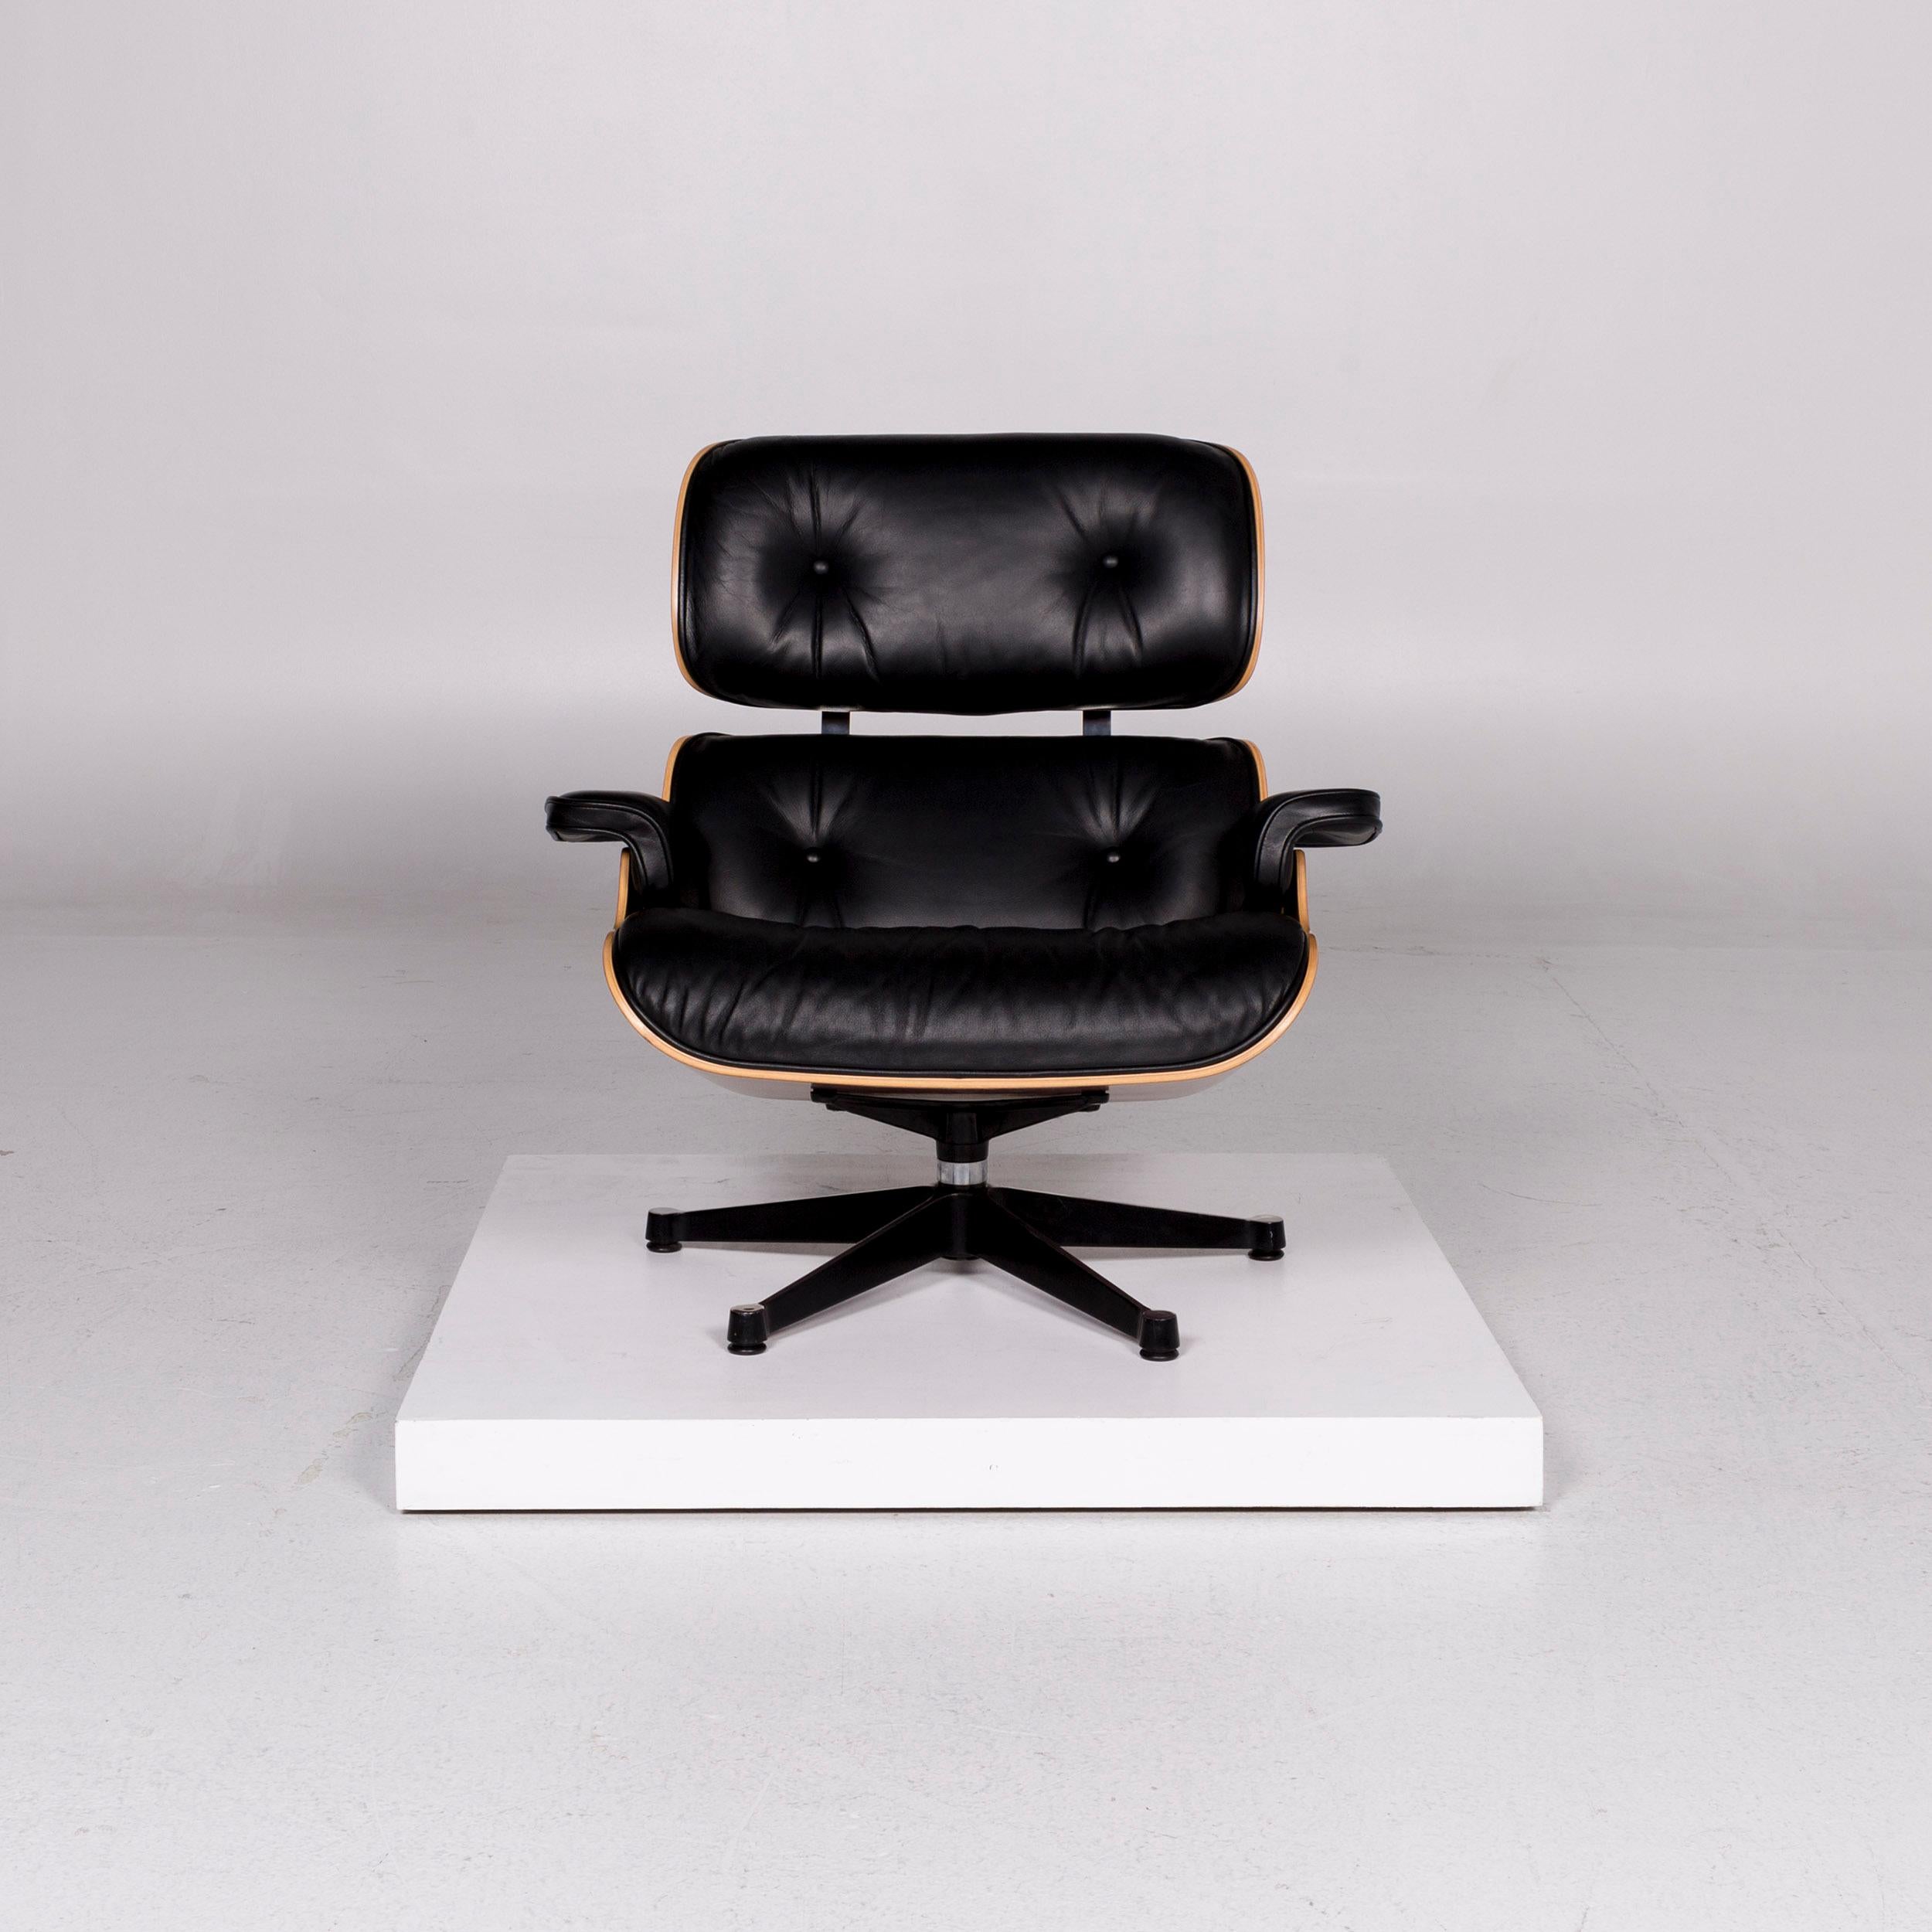 We bring to you a Vitra Eames Lounge Chair Leather Armchair Black Charles & Ray Eames Club Chair.
 SKU: #11167
 
 Product Measurements in centimeters:
 
 depth: 89
 width: 84
 height: 89
 seat-height: 40
 rest-height: 50
 seat-depth: 51
 seat-width: